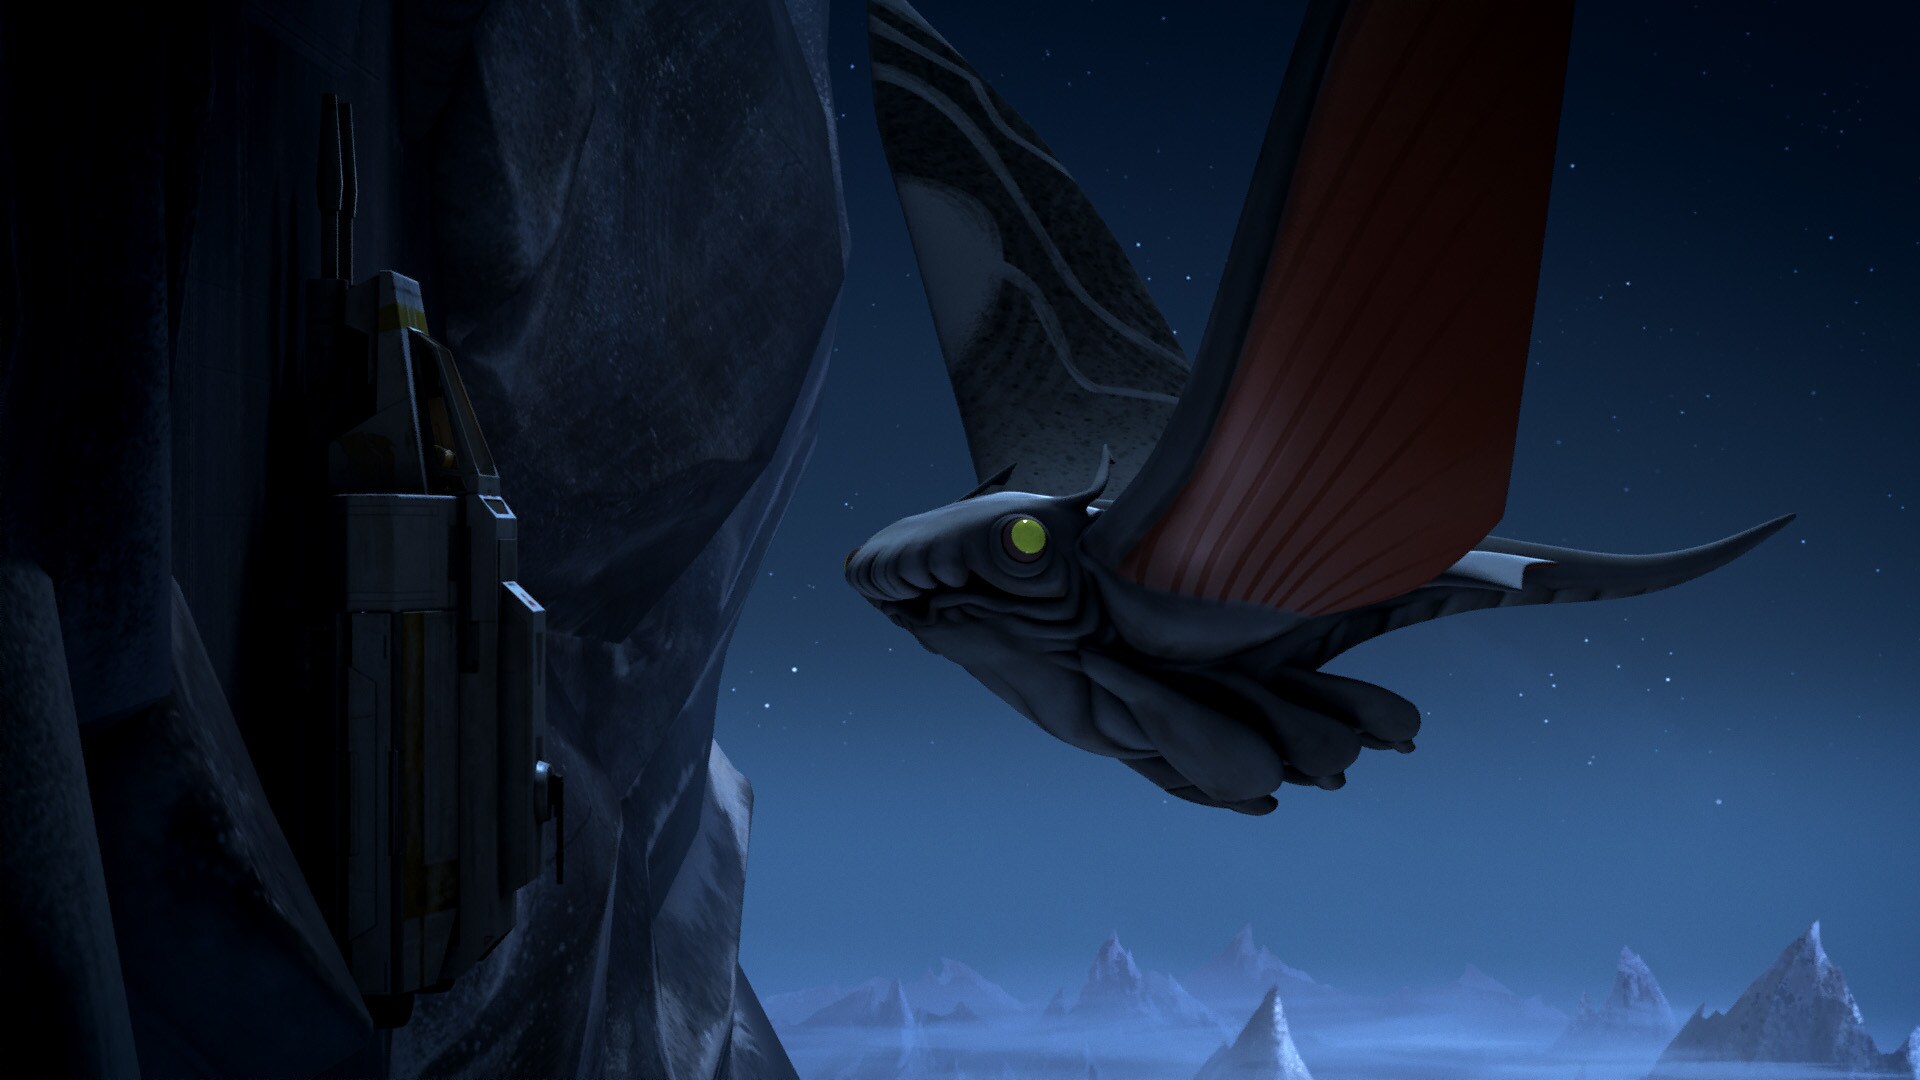 Hera docks the Phantom to the side of the Spire. While waiting, she picks up an incoming object o...